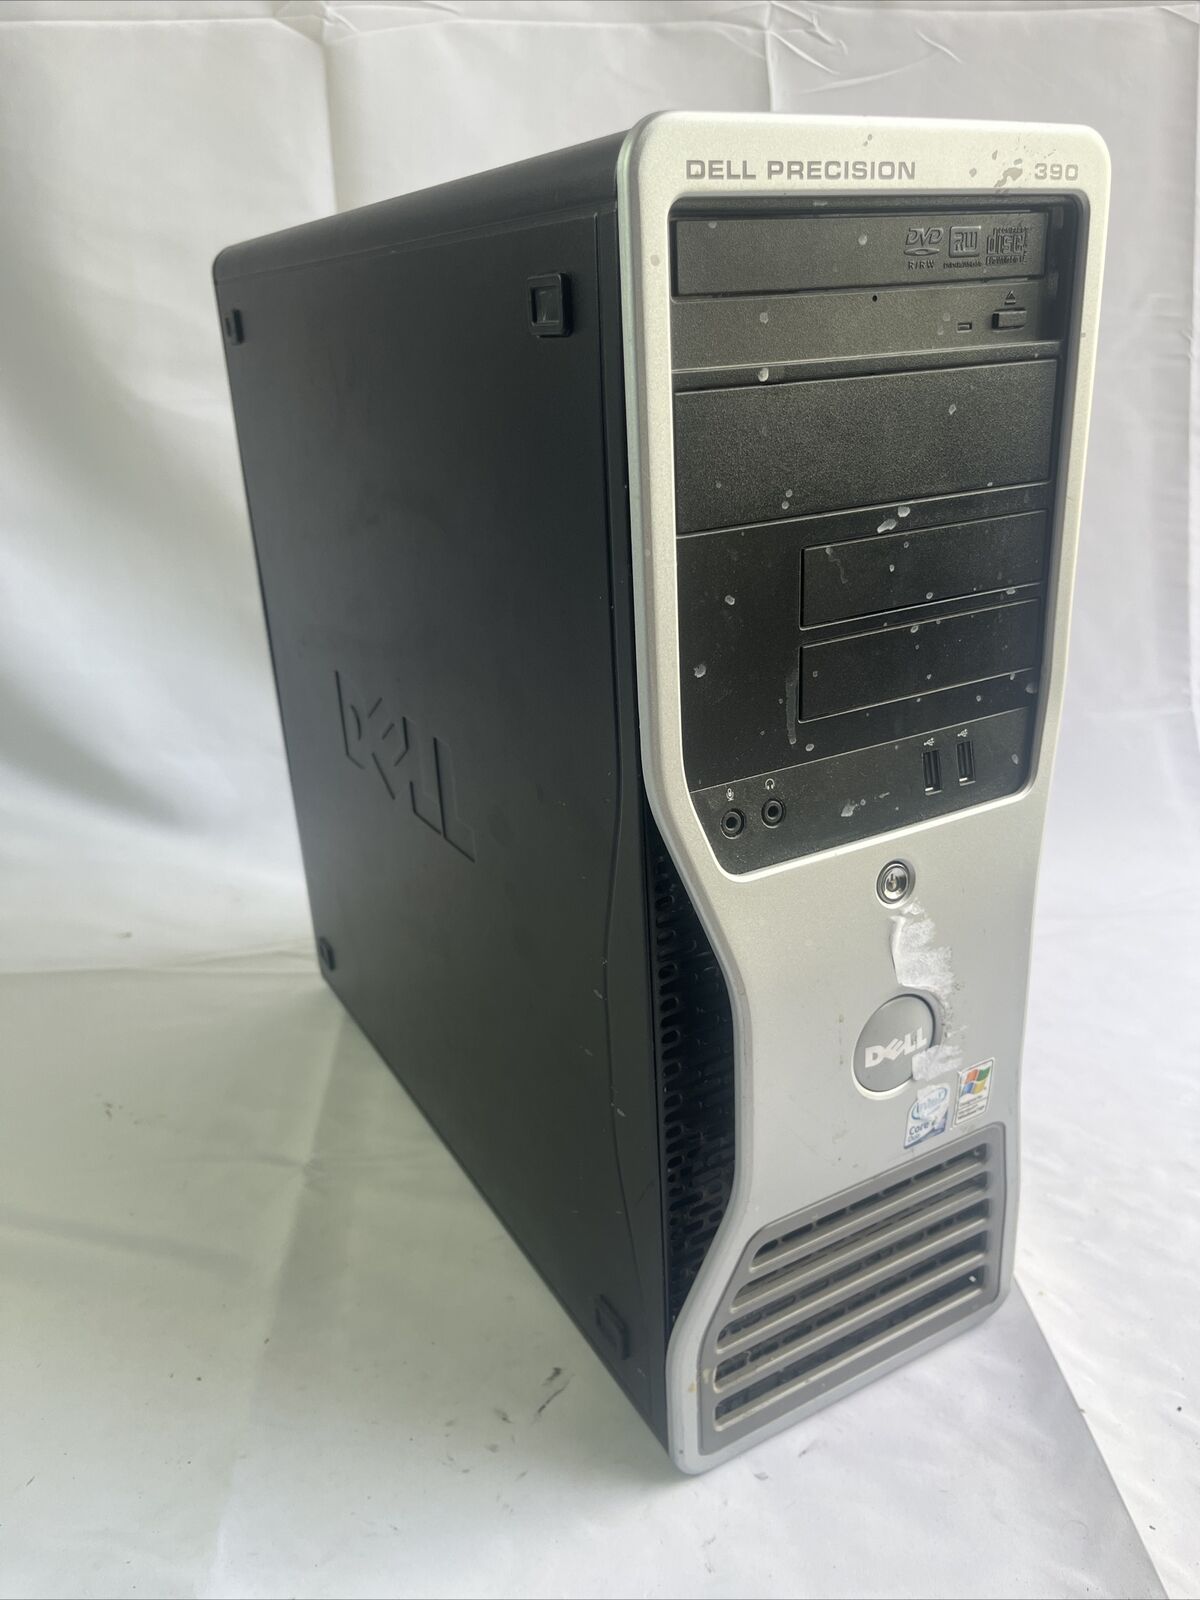 Dell Precision Workstation 390 Intel Core 2 Duo 2.4 Ghz 2GB 250 GB Hdd Tested